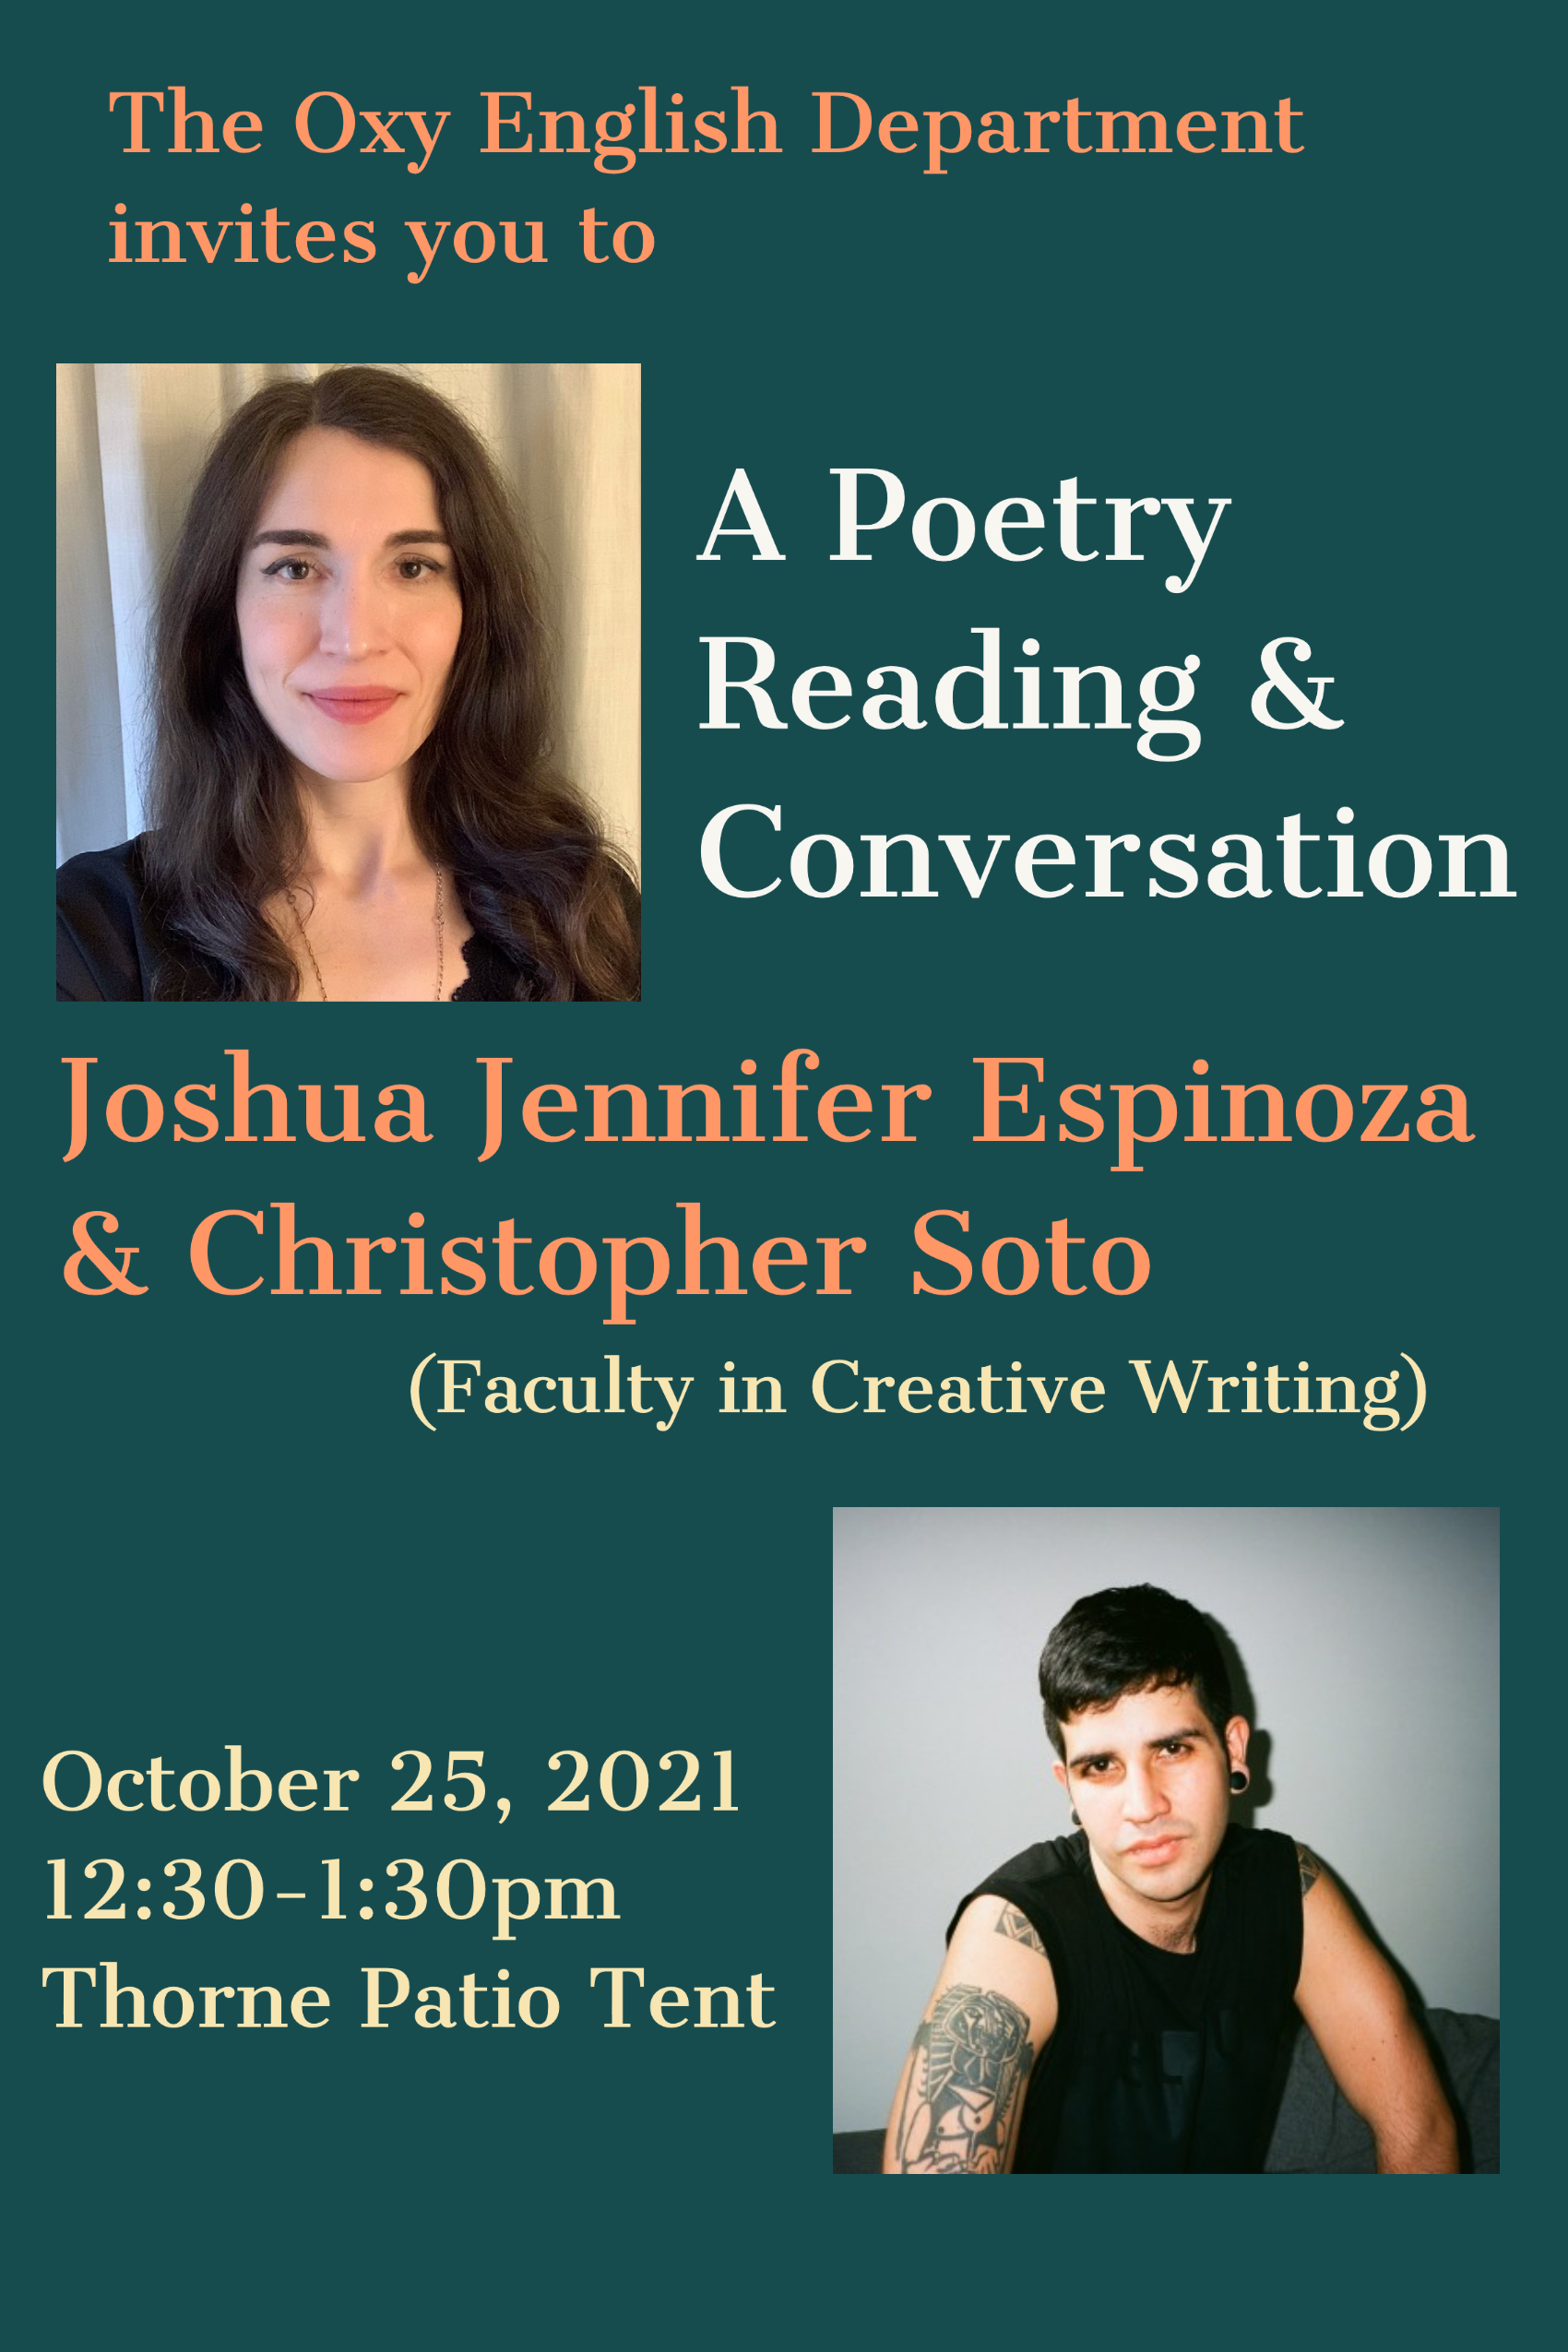 A Poetry Reading and Conversation - Joshua Jennifer Espinoza and Christopher Soto